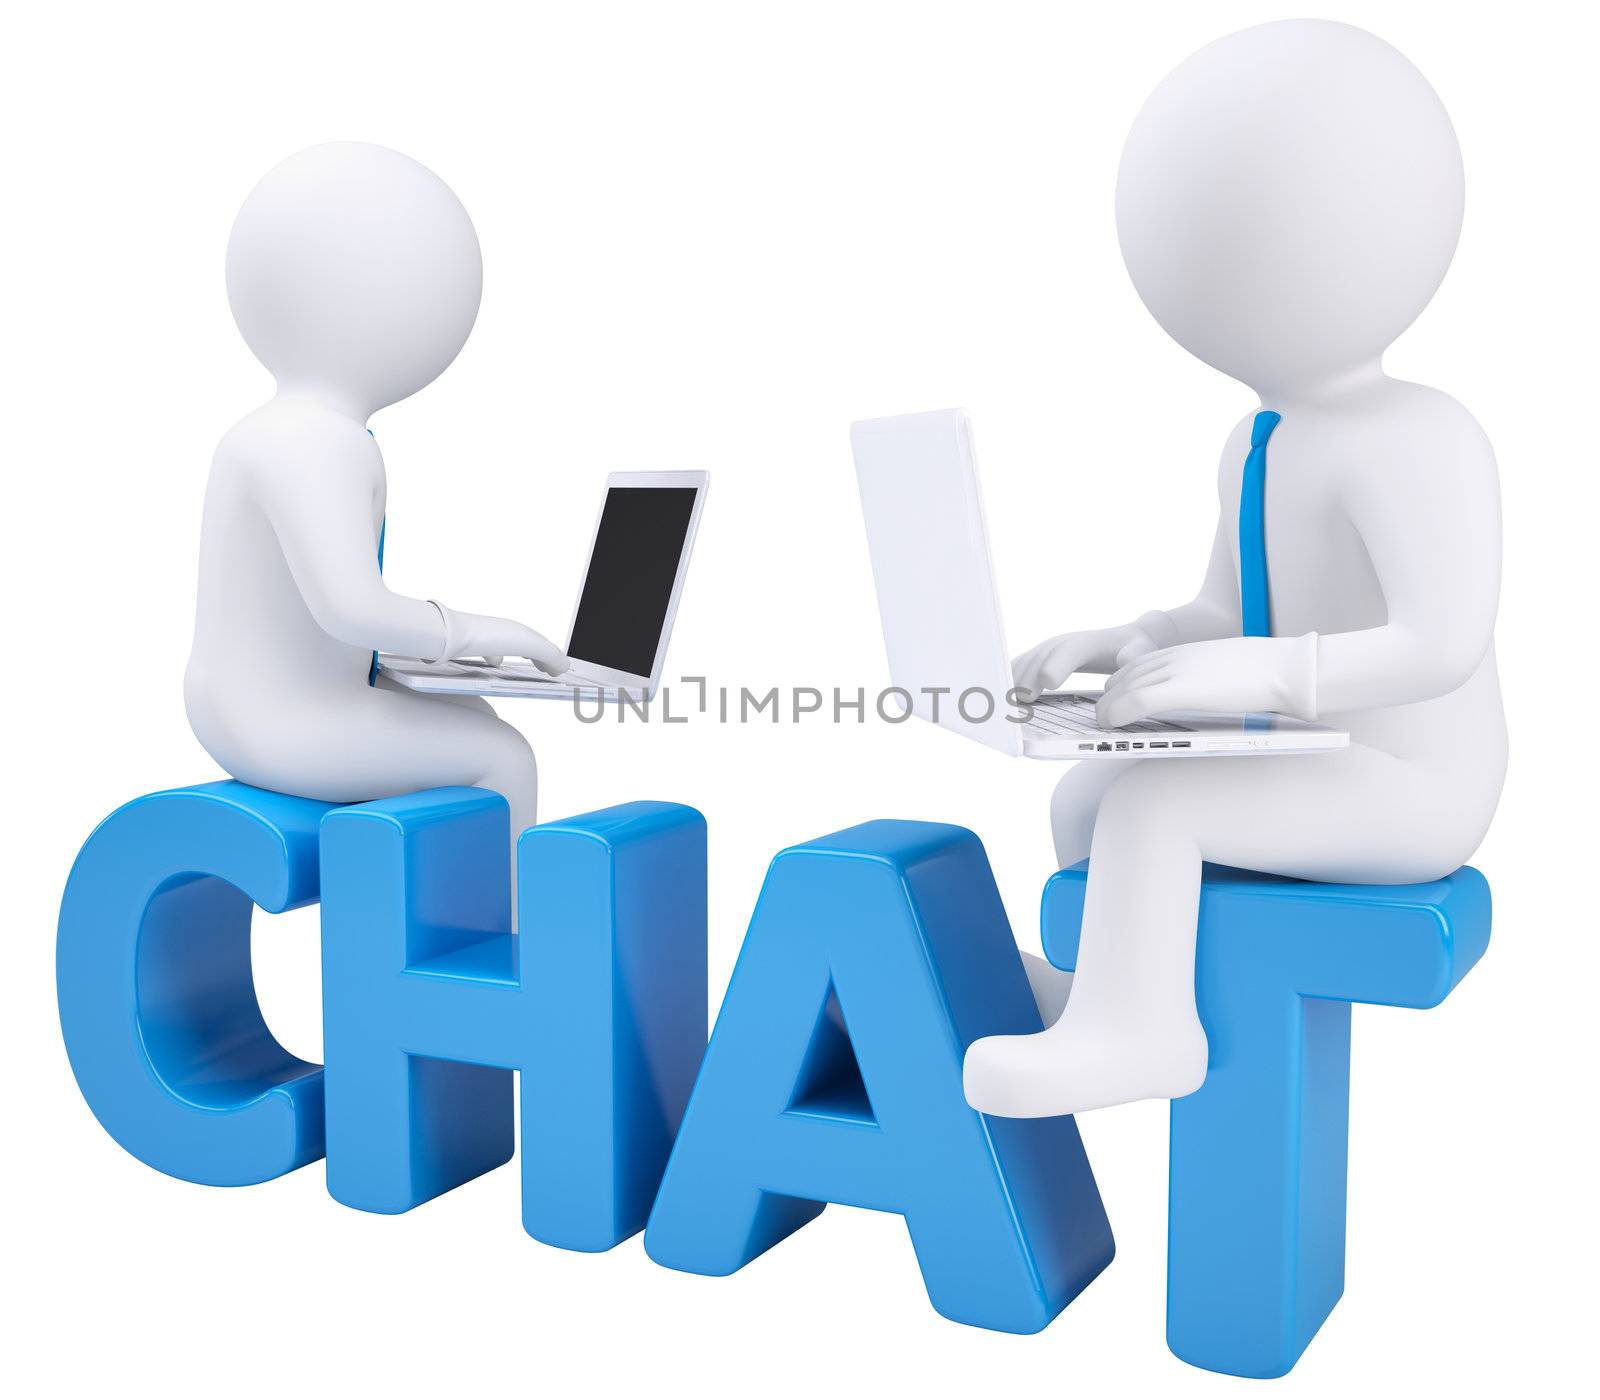 3d man sitting with a laptop on the word chat. Isolated render on white background